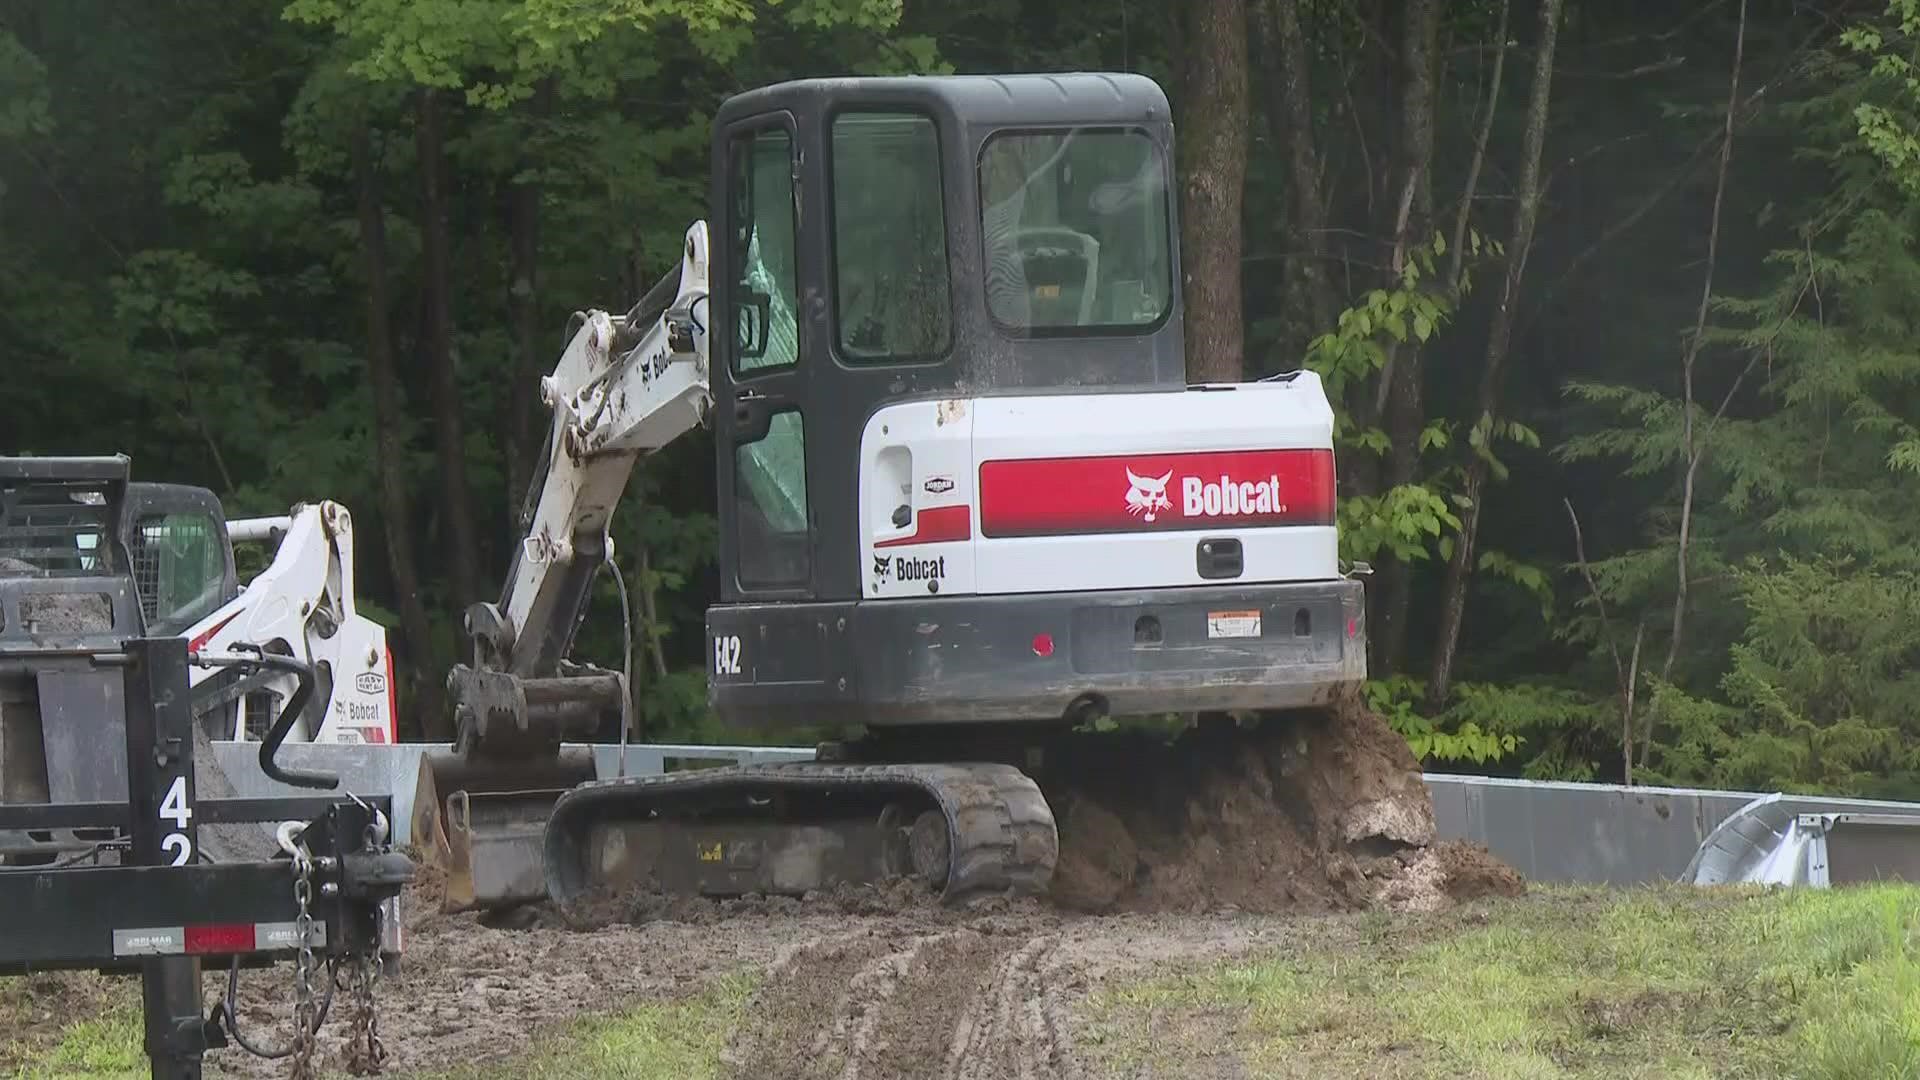 According to police, the workers were installing an in-ground pool at the Auburn home when an excavator overturned, trapping the man under the boom